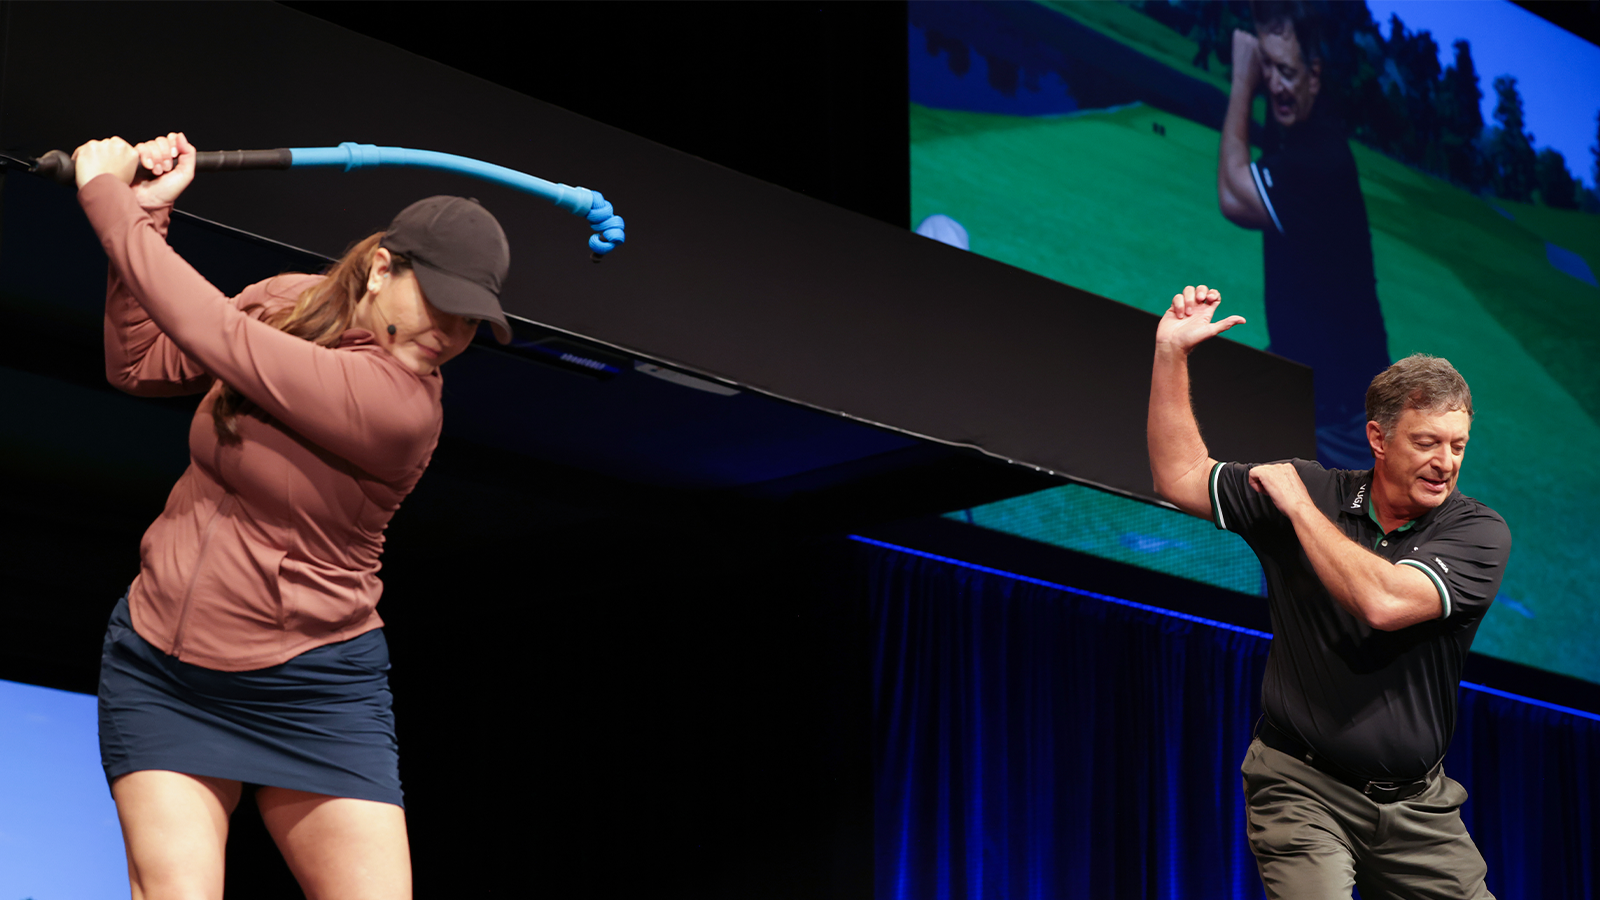 Mike Romatowski demonstrates during the Teaching & Coaching Summit at the 2023 PGA Show at Orange County Convention Center on Sunday, January 22, 2023 in Orlando, Florida. (Photo by Gary Bogdon/PGA of America)